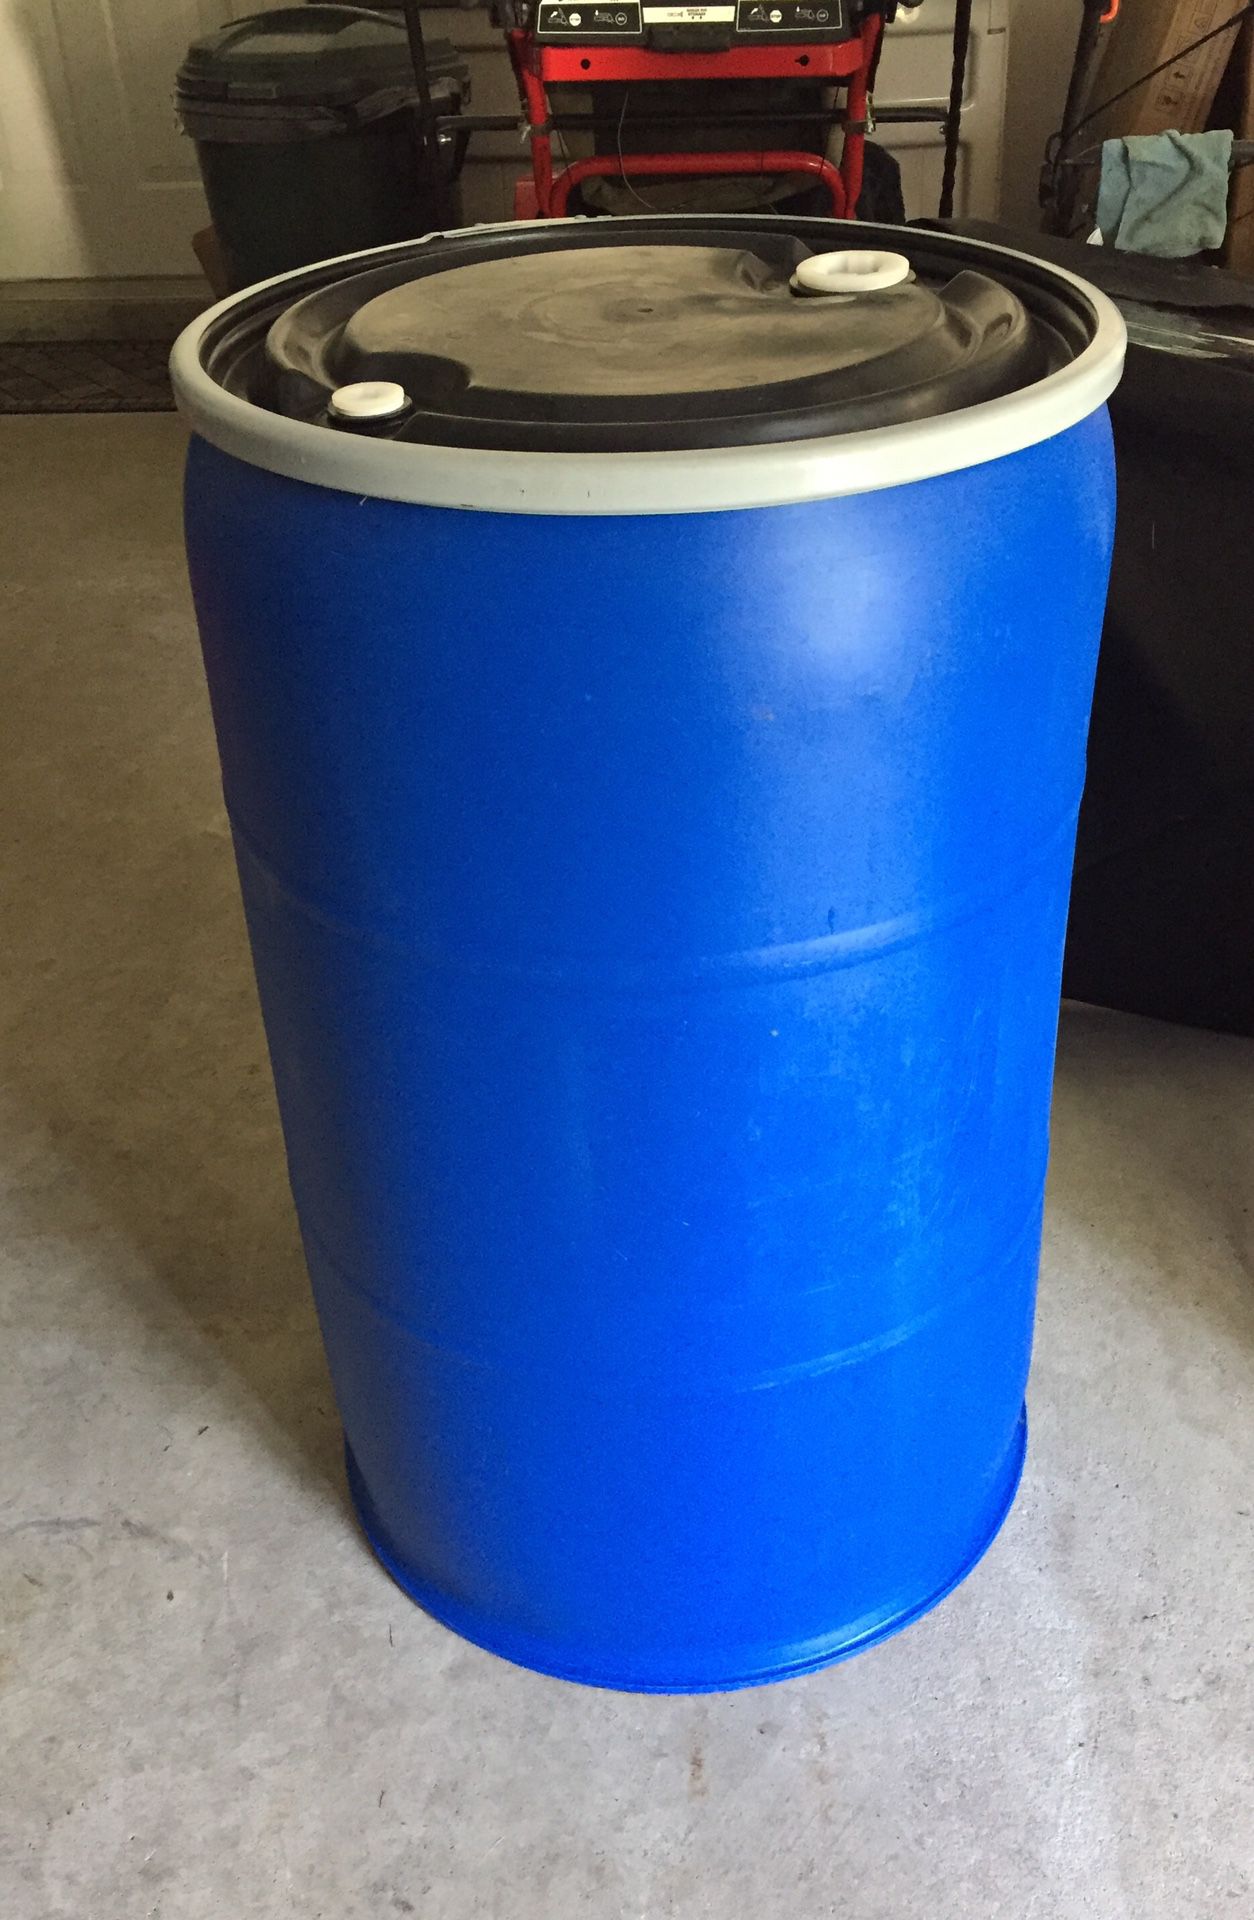 55 gallon Blue or Black Storage Barrel Container Bin! Use for shipping, storage or as a cooler! BRAND NEW, MINT